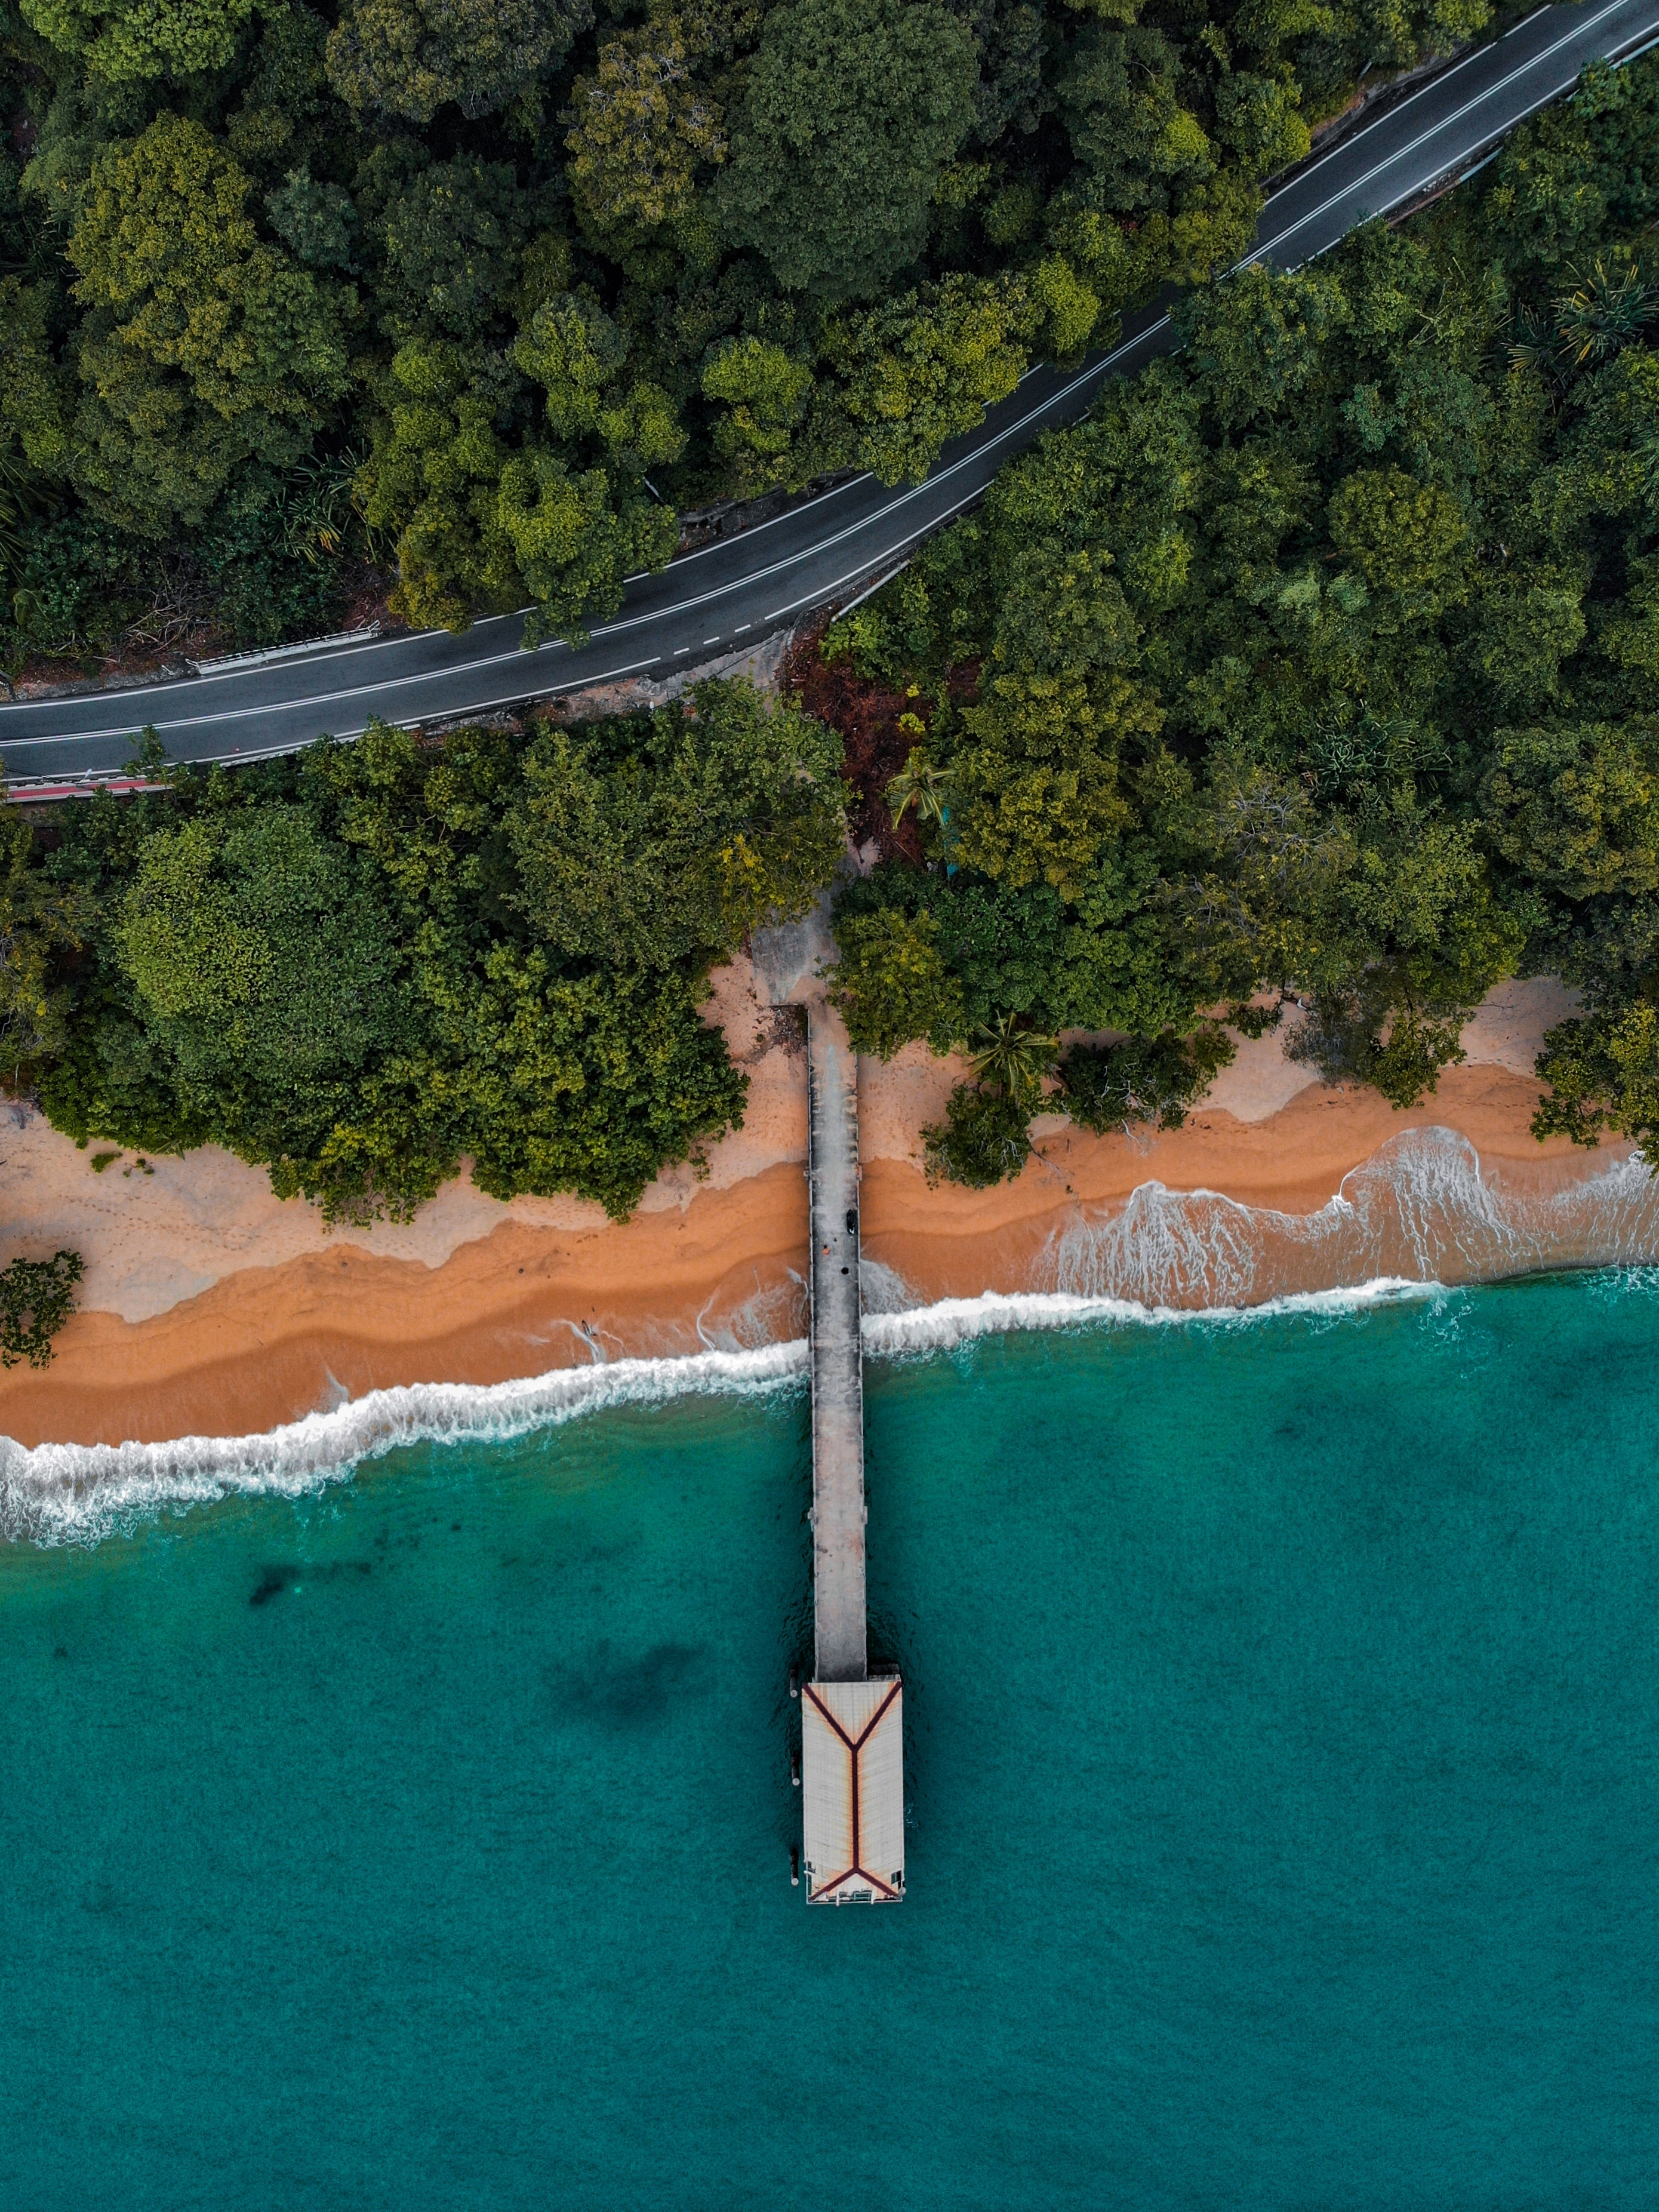 view from above, nature, trees, coast, pier, bungalow 8K